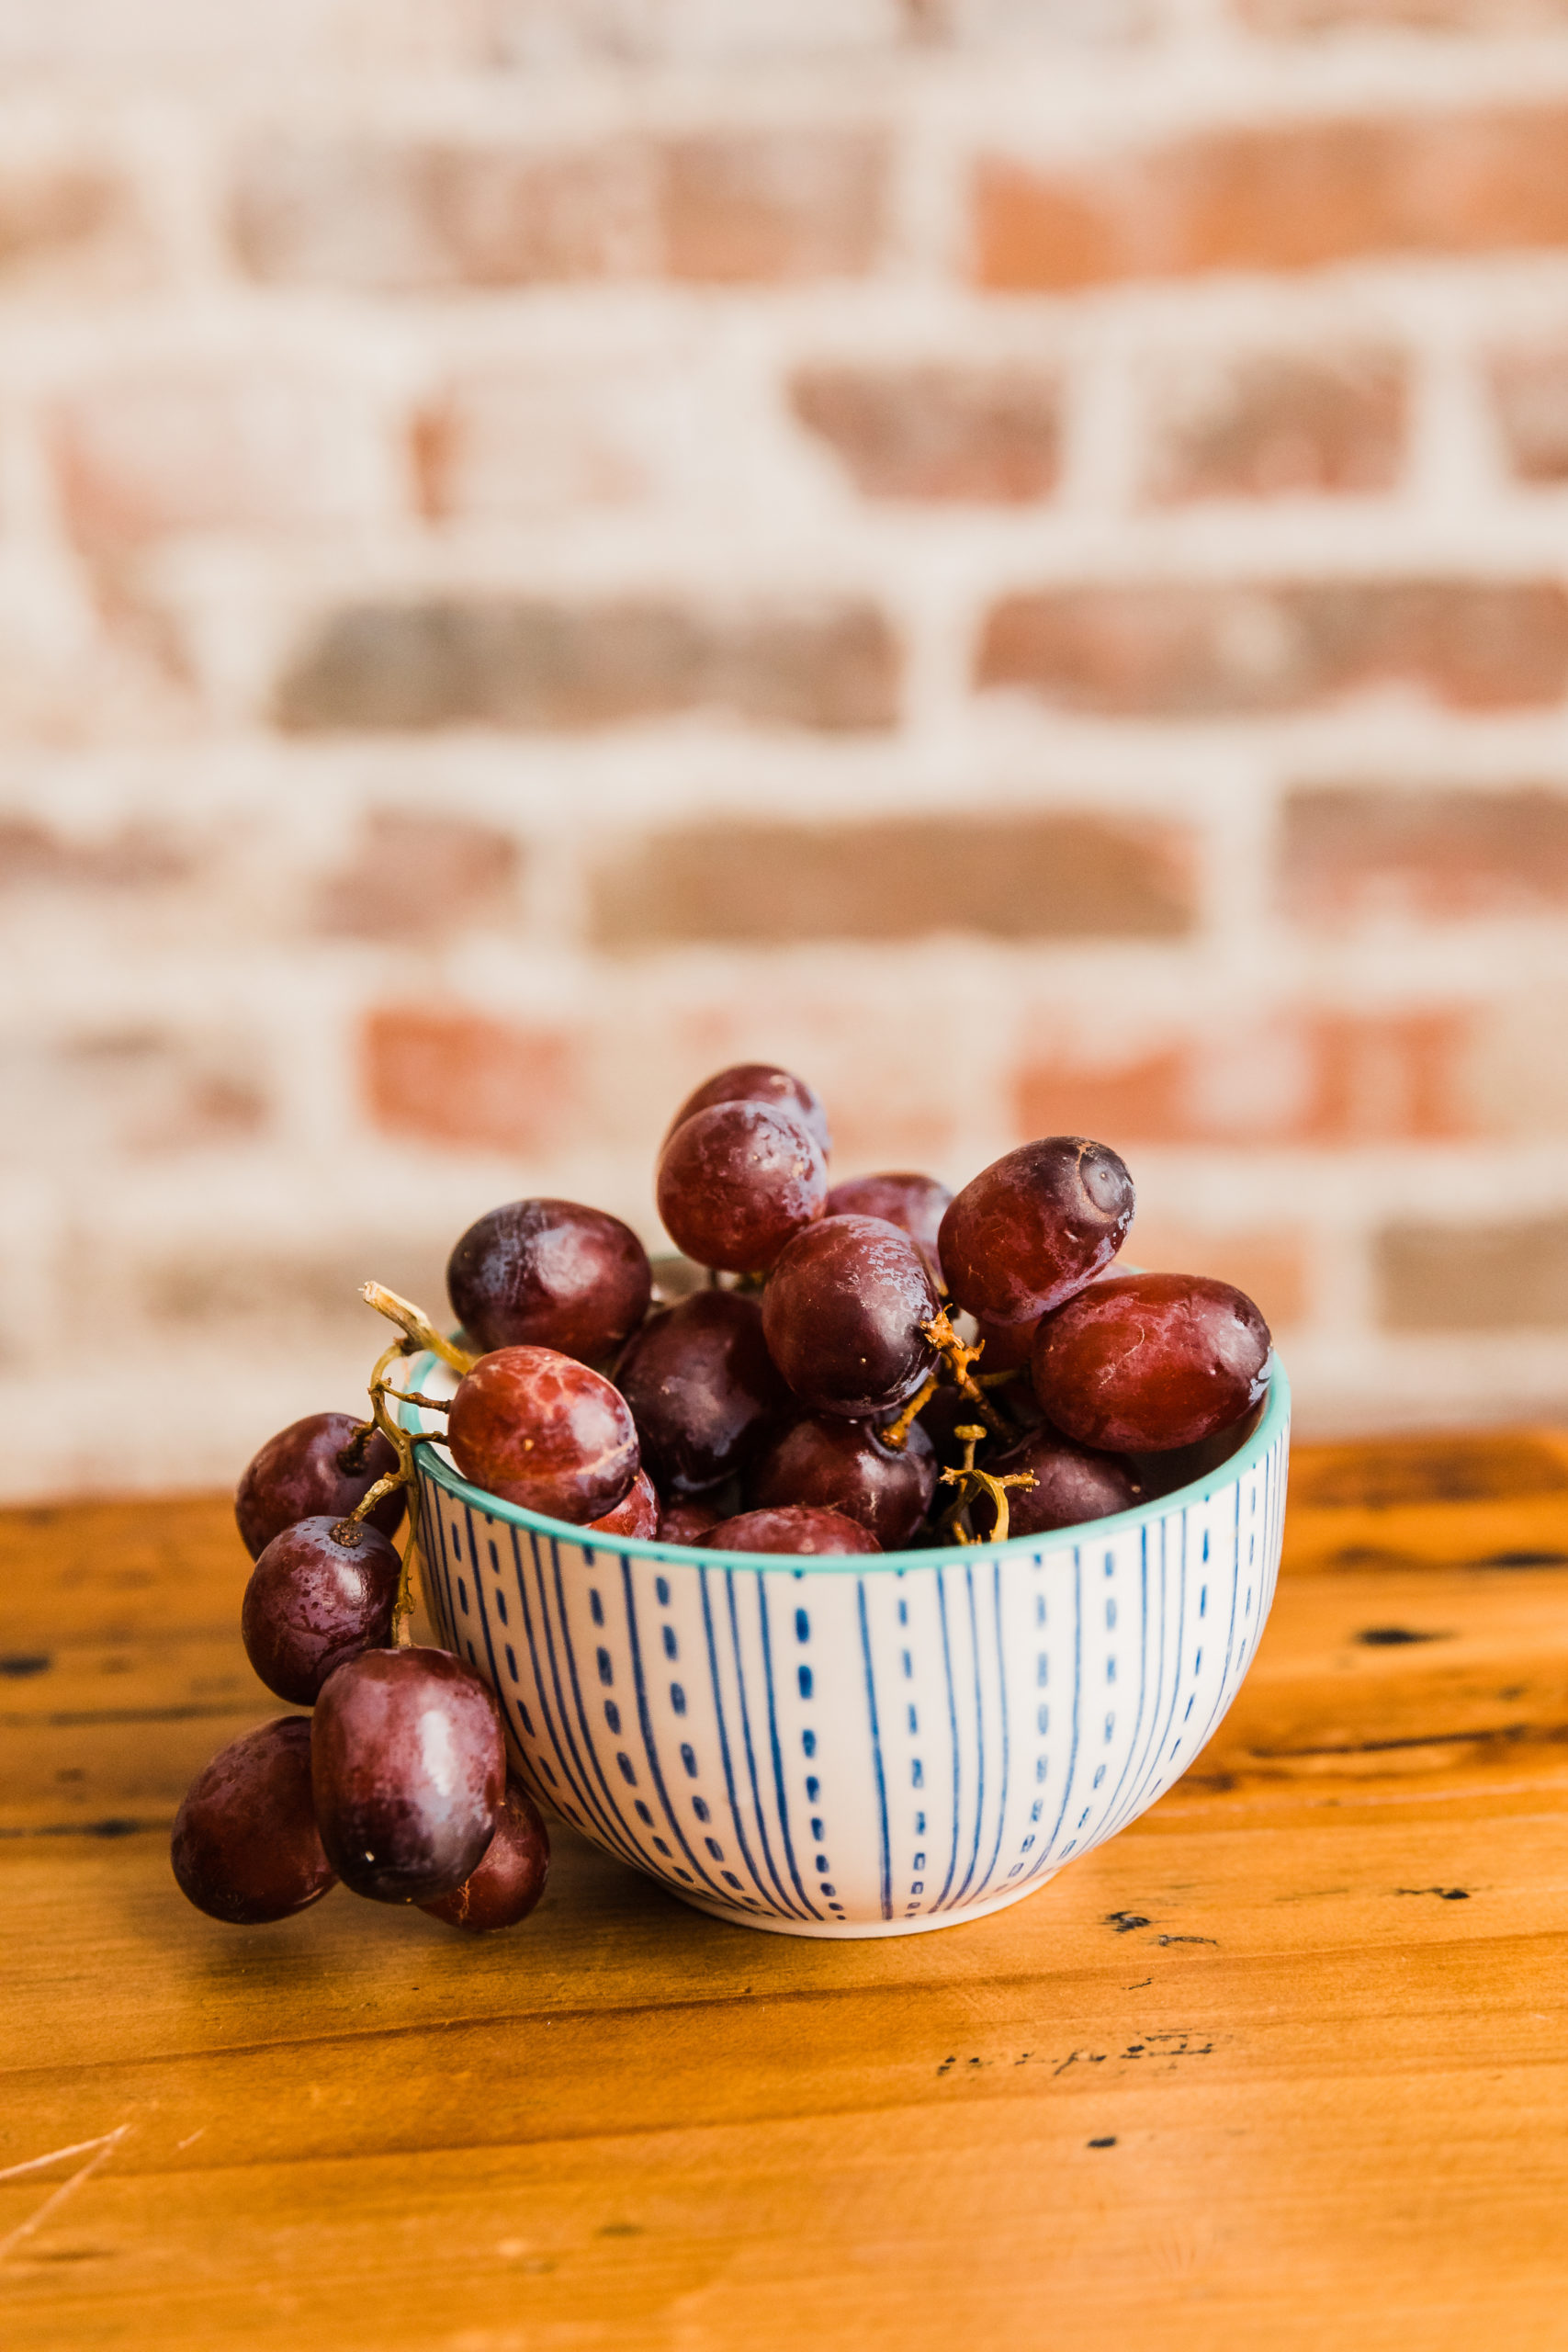 Red grapes cascading out of a small patterned bowl onto a wooden table in front of a brick wall backdrop